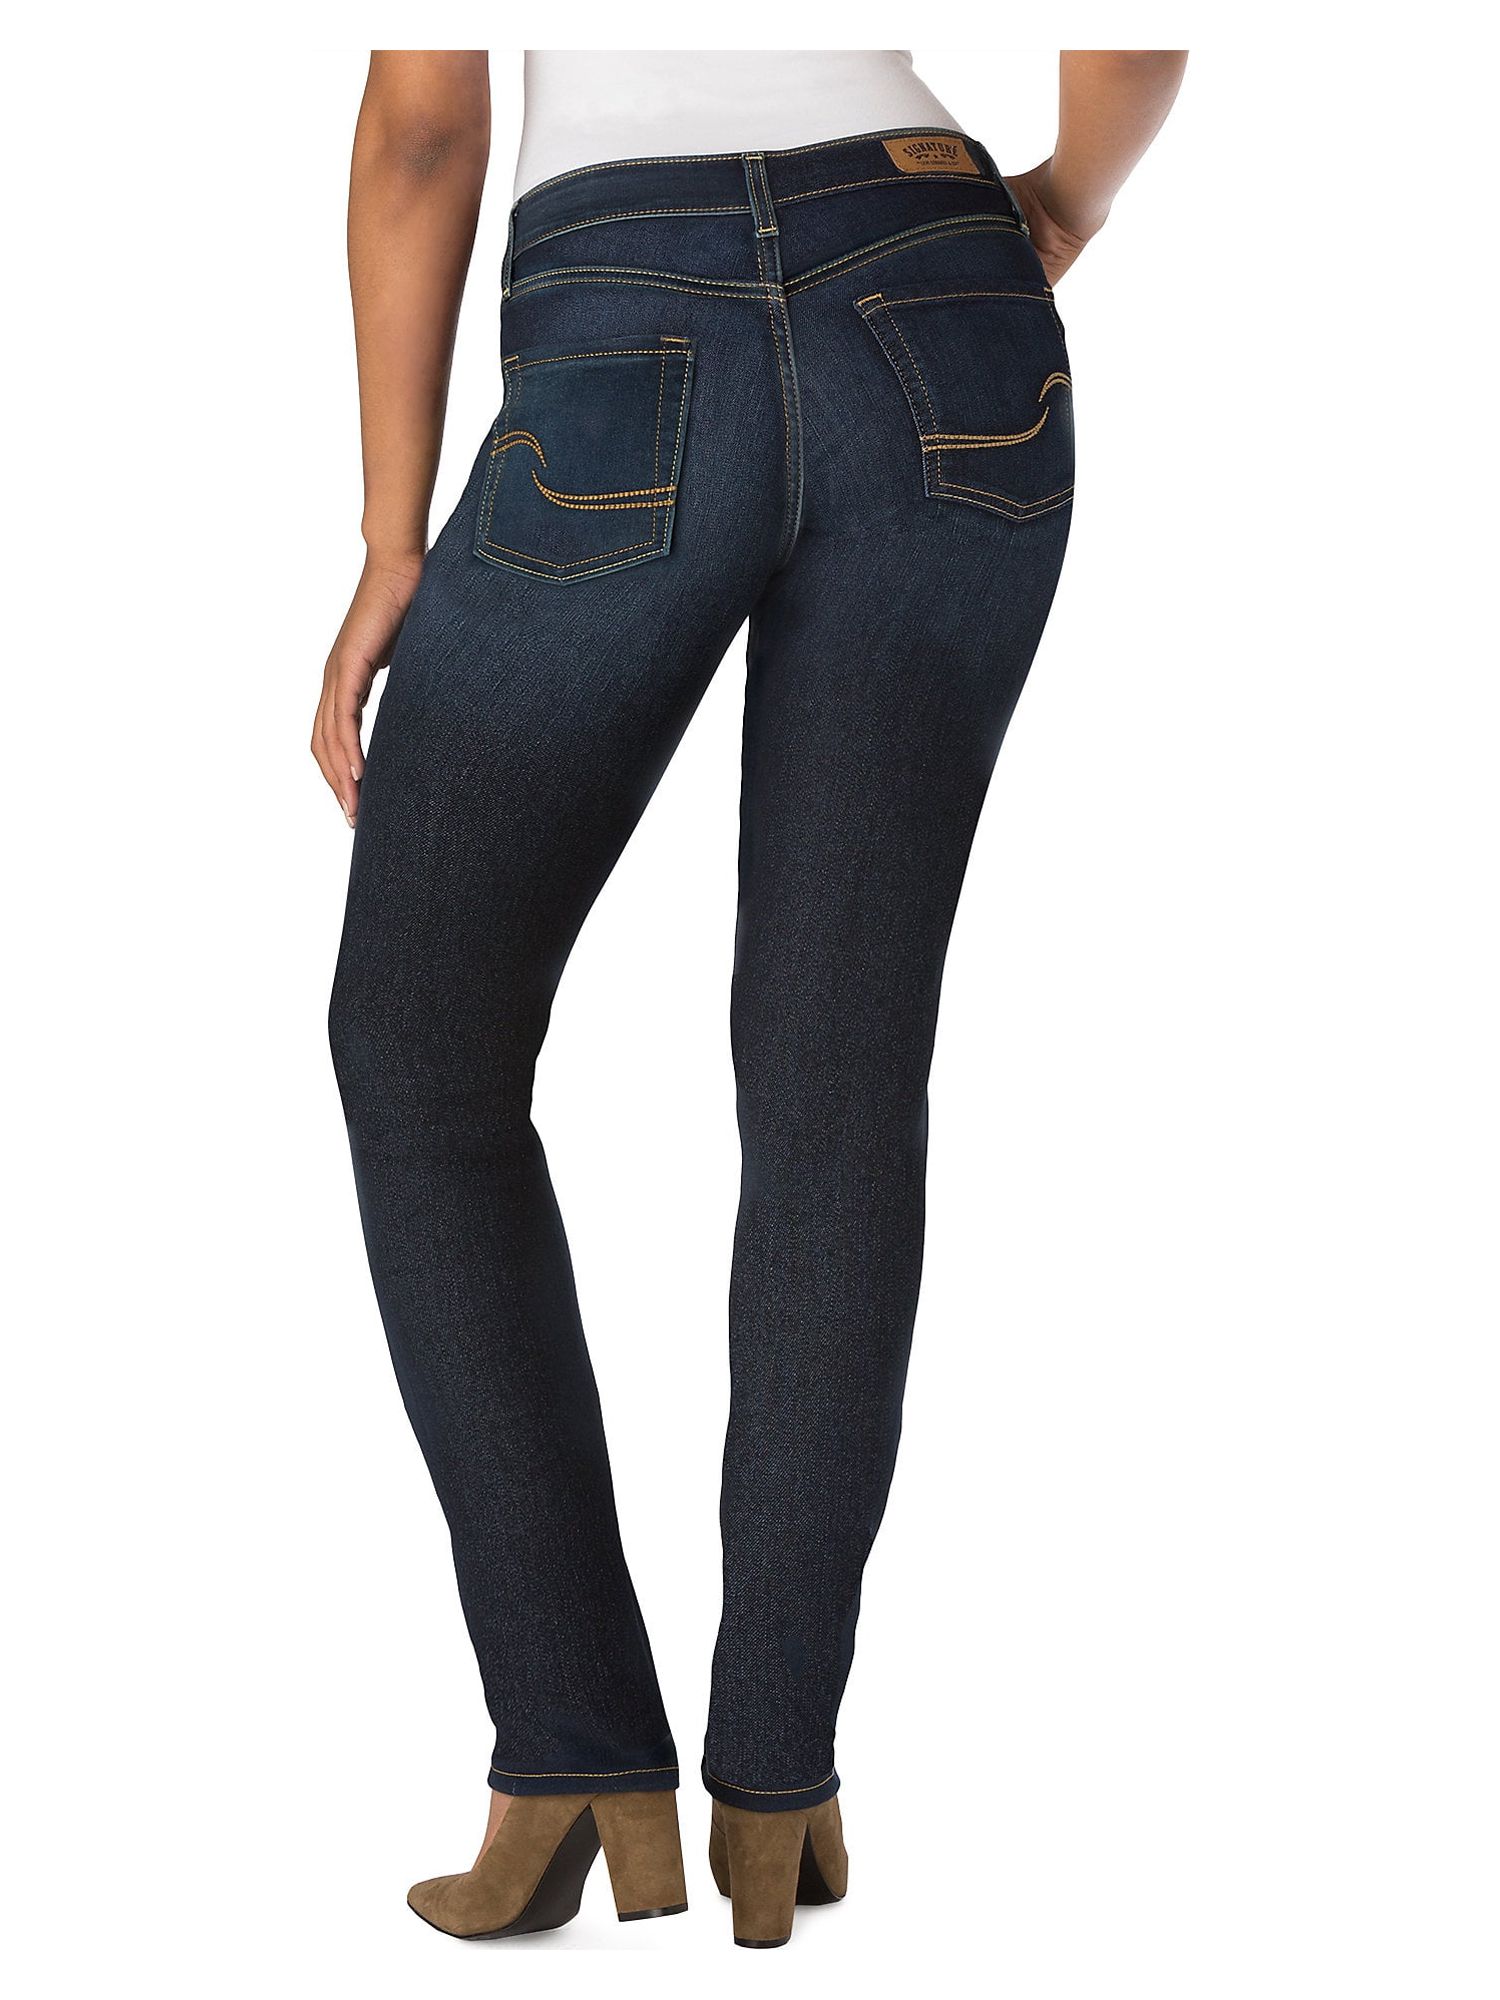 Signature by Levi Strauss & Co. Women's Modern Mid-Rise Straight Jeans - image 3 of 9